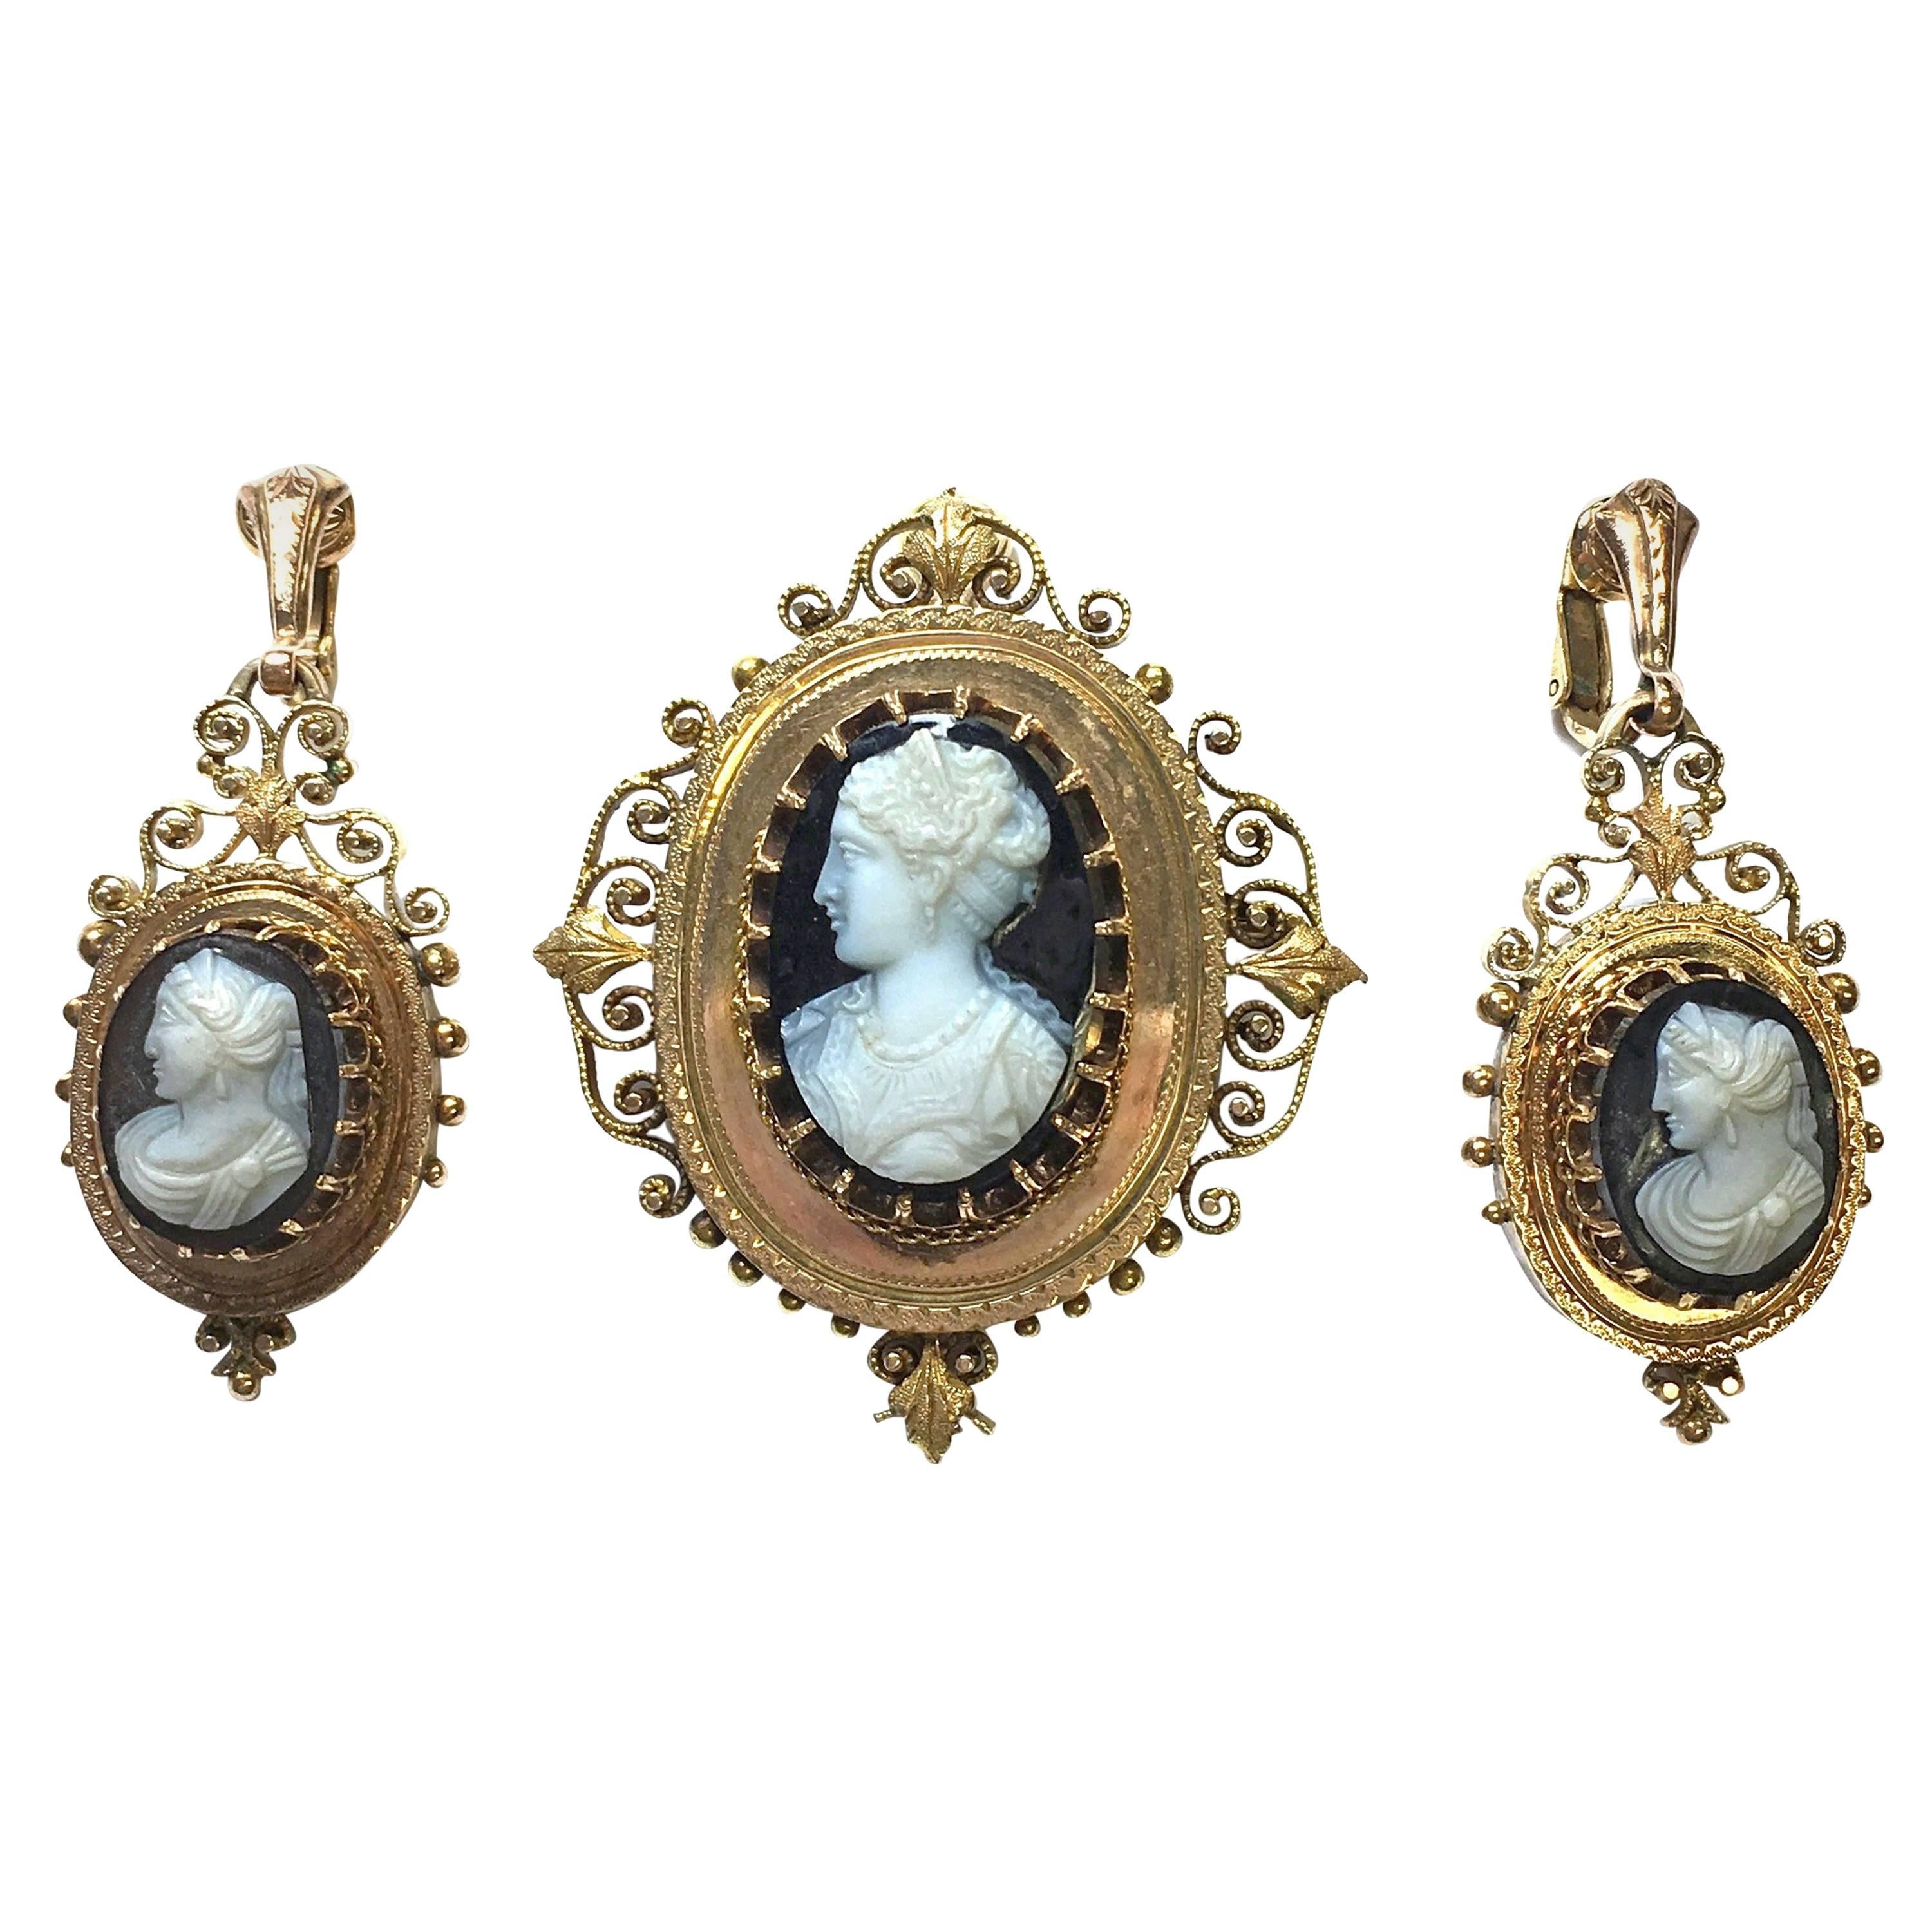 Victorian Onyx Cameo Gold Pendant Brooch and Earrings Ensemble For Sale